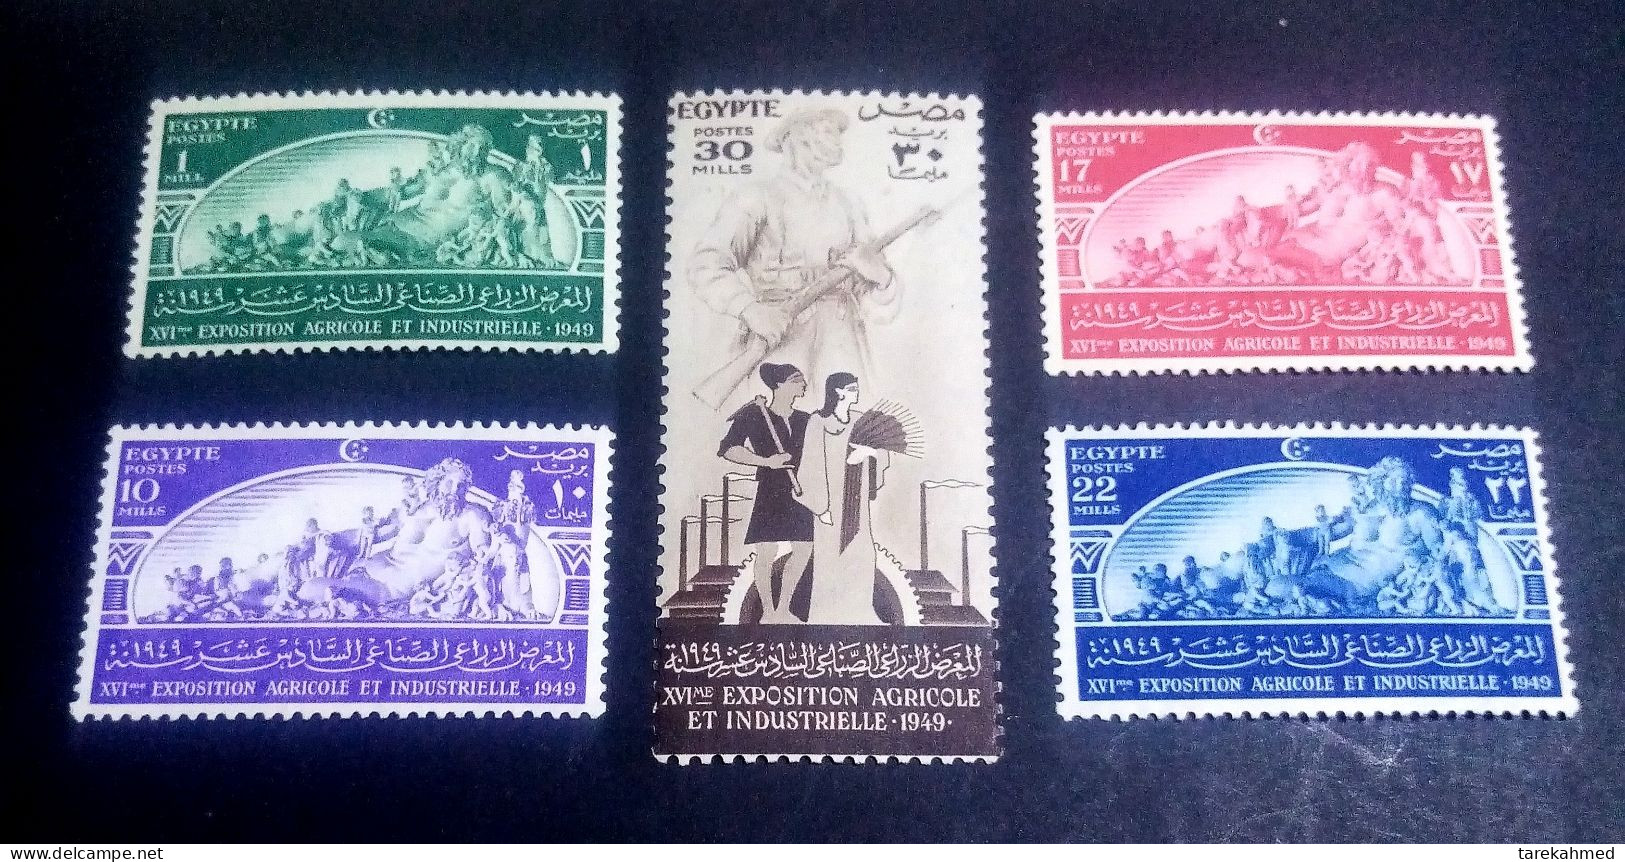 EGYPT KINGDOM 1949 , AGRICULTURE & INDUSTRY EXPOSITION S.G. 352-356 . Super MNH - Nuevos